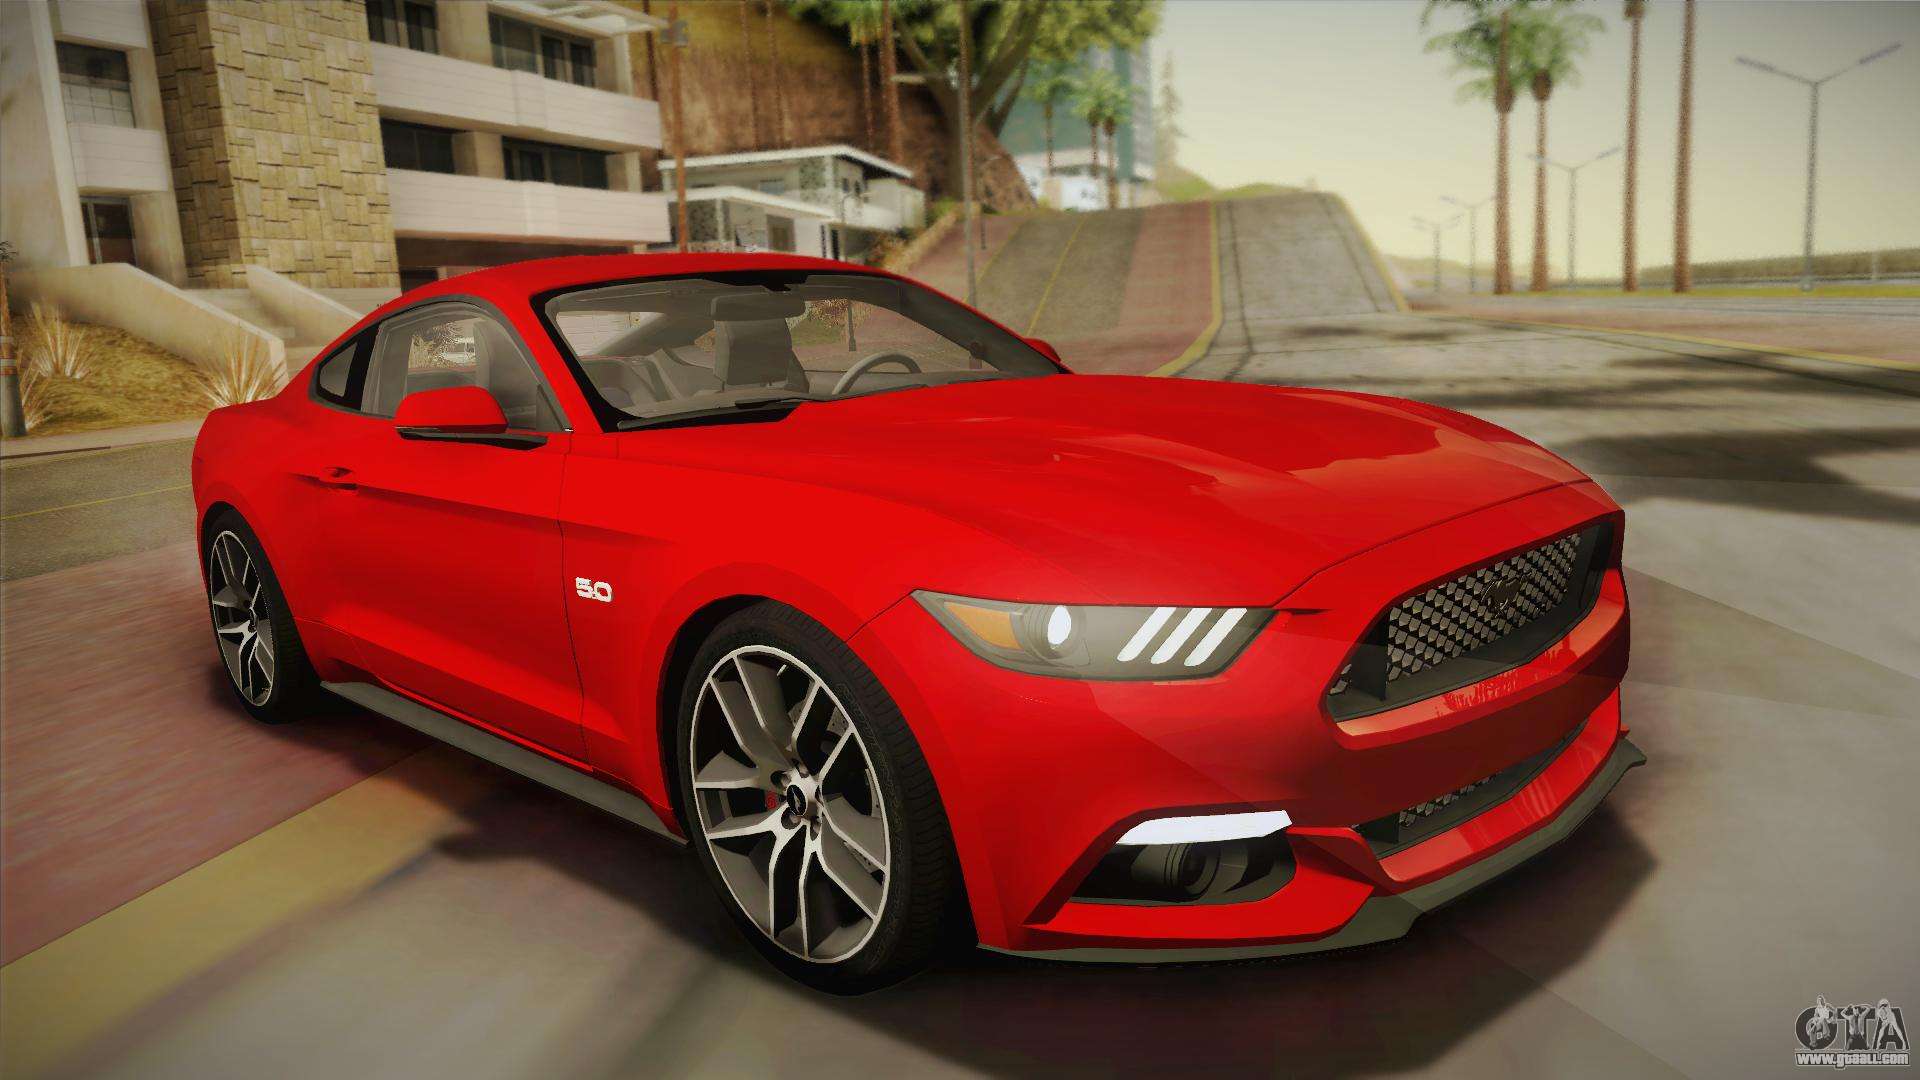 Ford Mustang GT 2015 5.0 for GTA Andreas